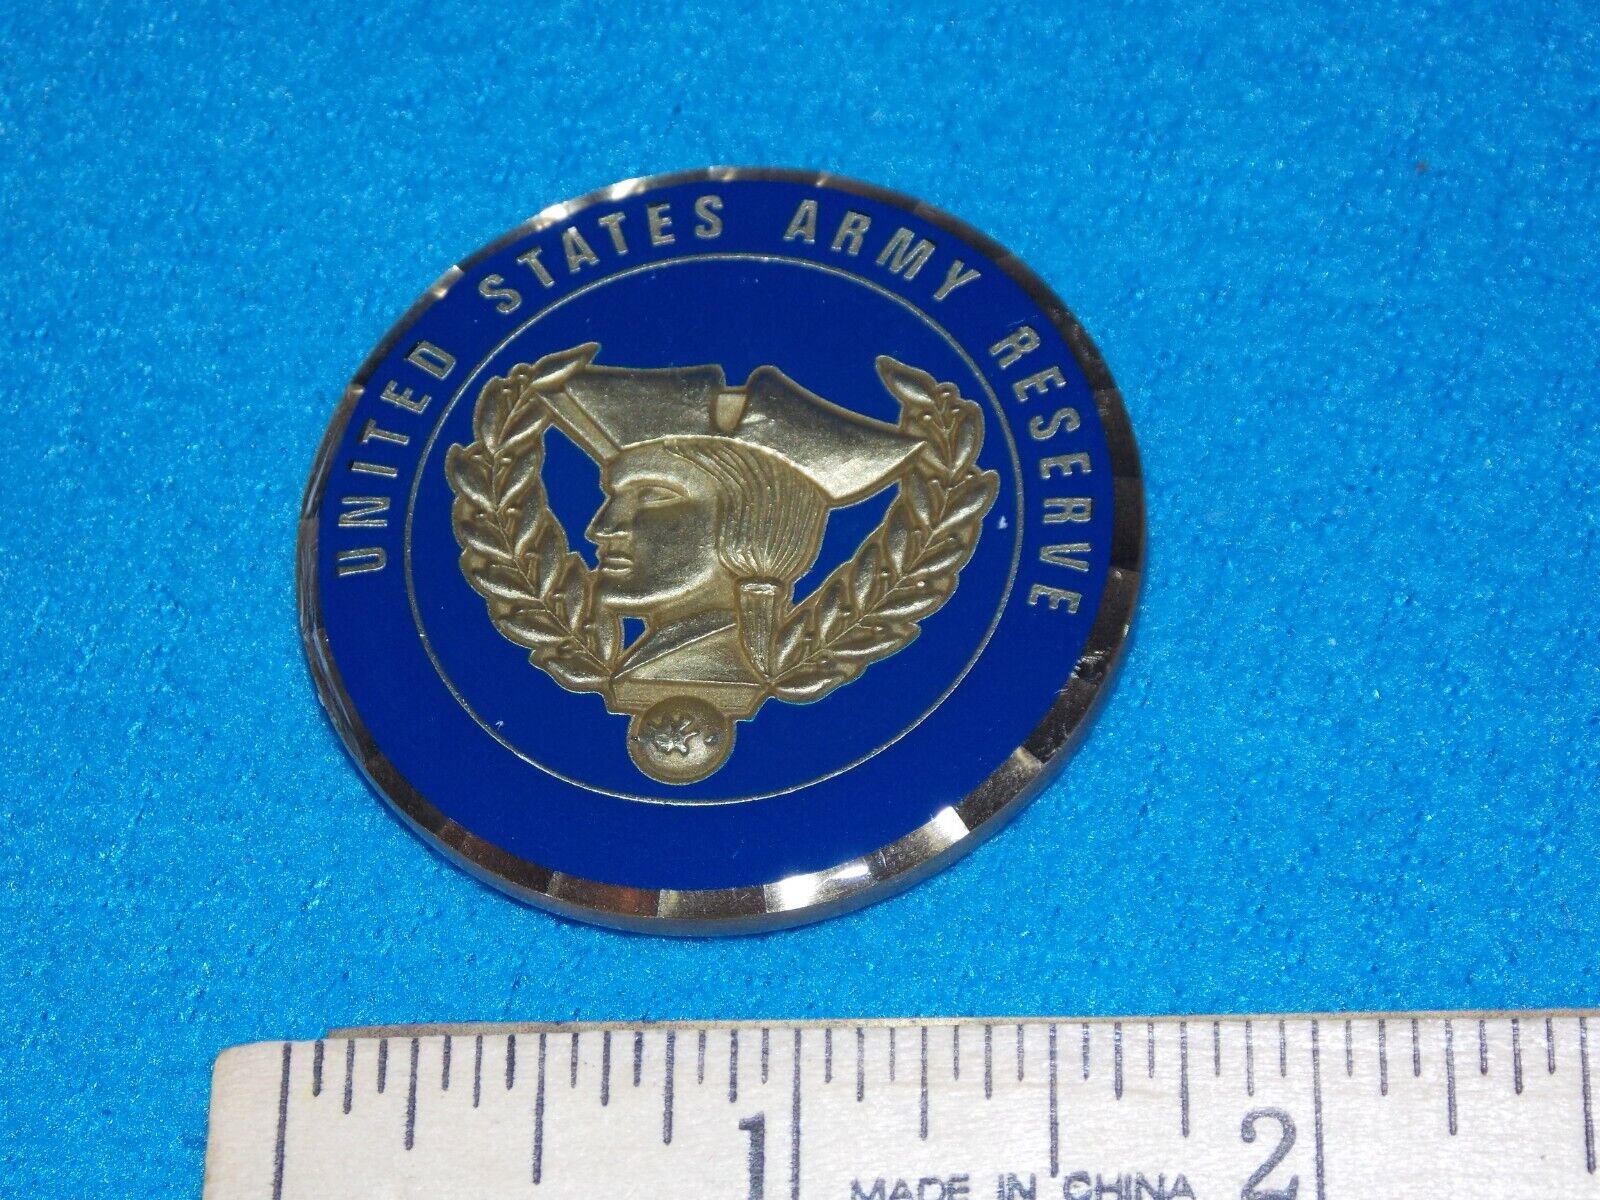 UNITED STATES ARMY RESERVE - CHALLENGE COIN